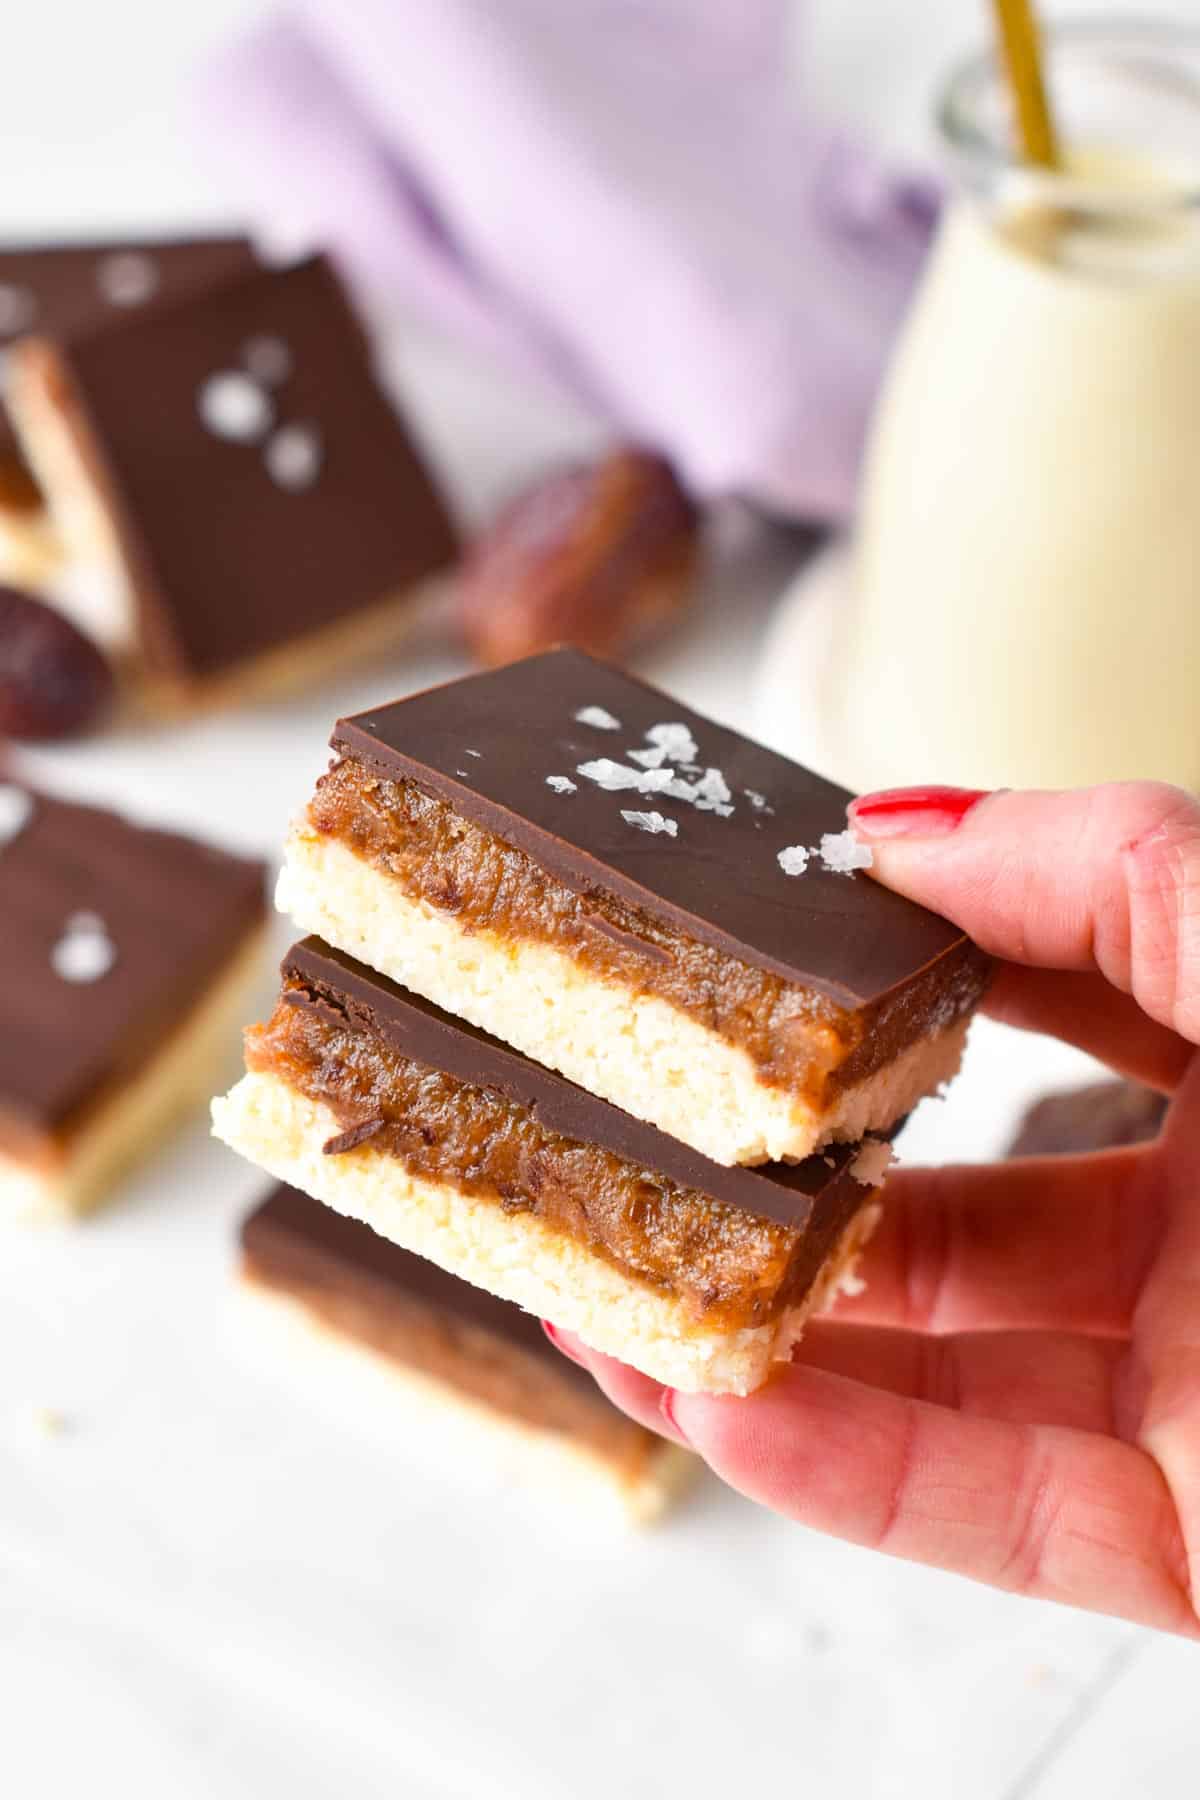 This healthy caramel slice is a delicious no-bake dessert made from an almond coconut base and topped with a date peanut butter caramel. If you love healthier treats naturally sweetened with wholesome ingredients, this is the best caramel slice you will ever make.